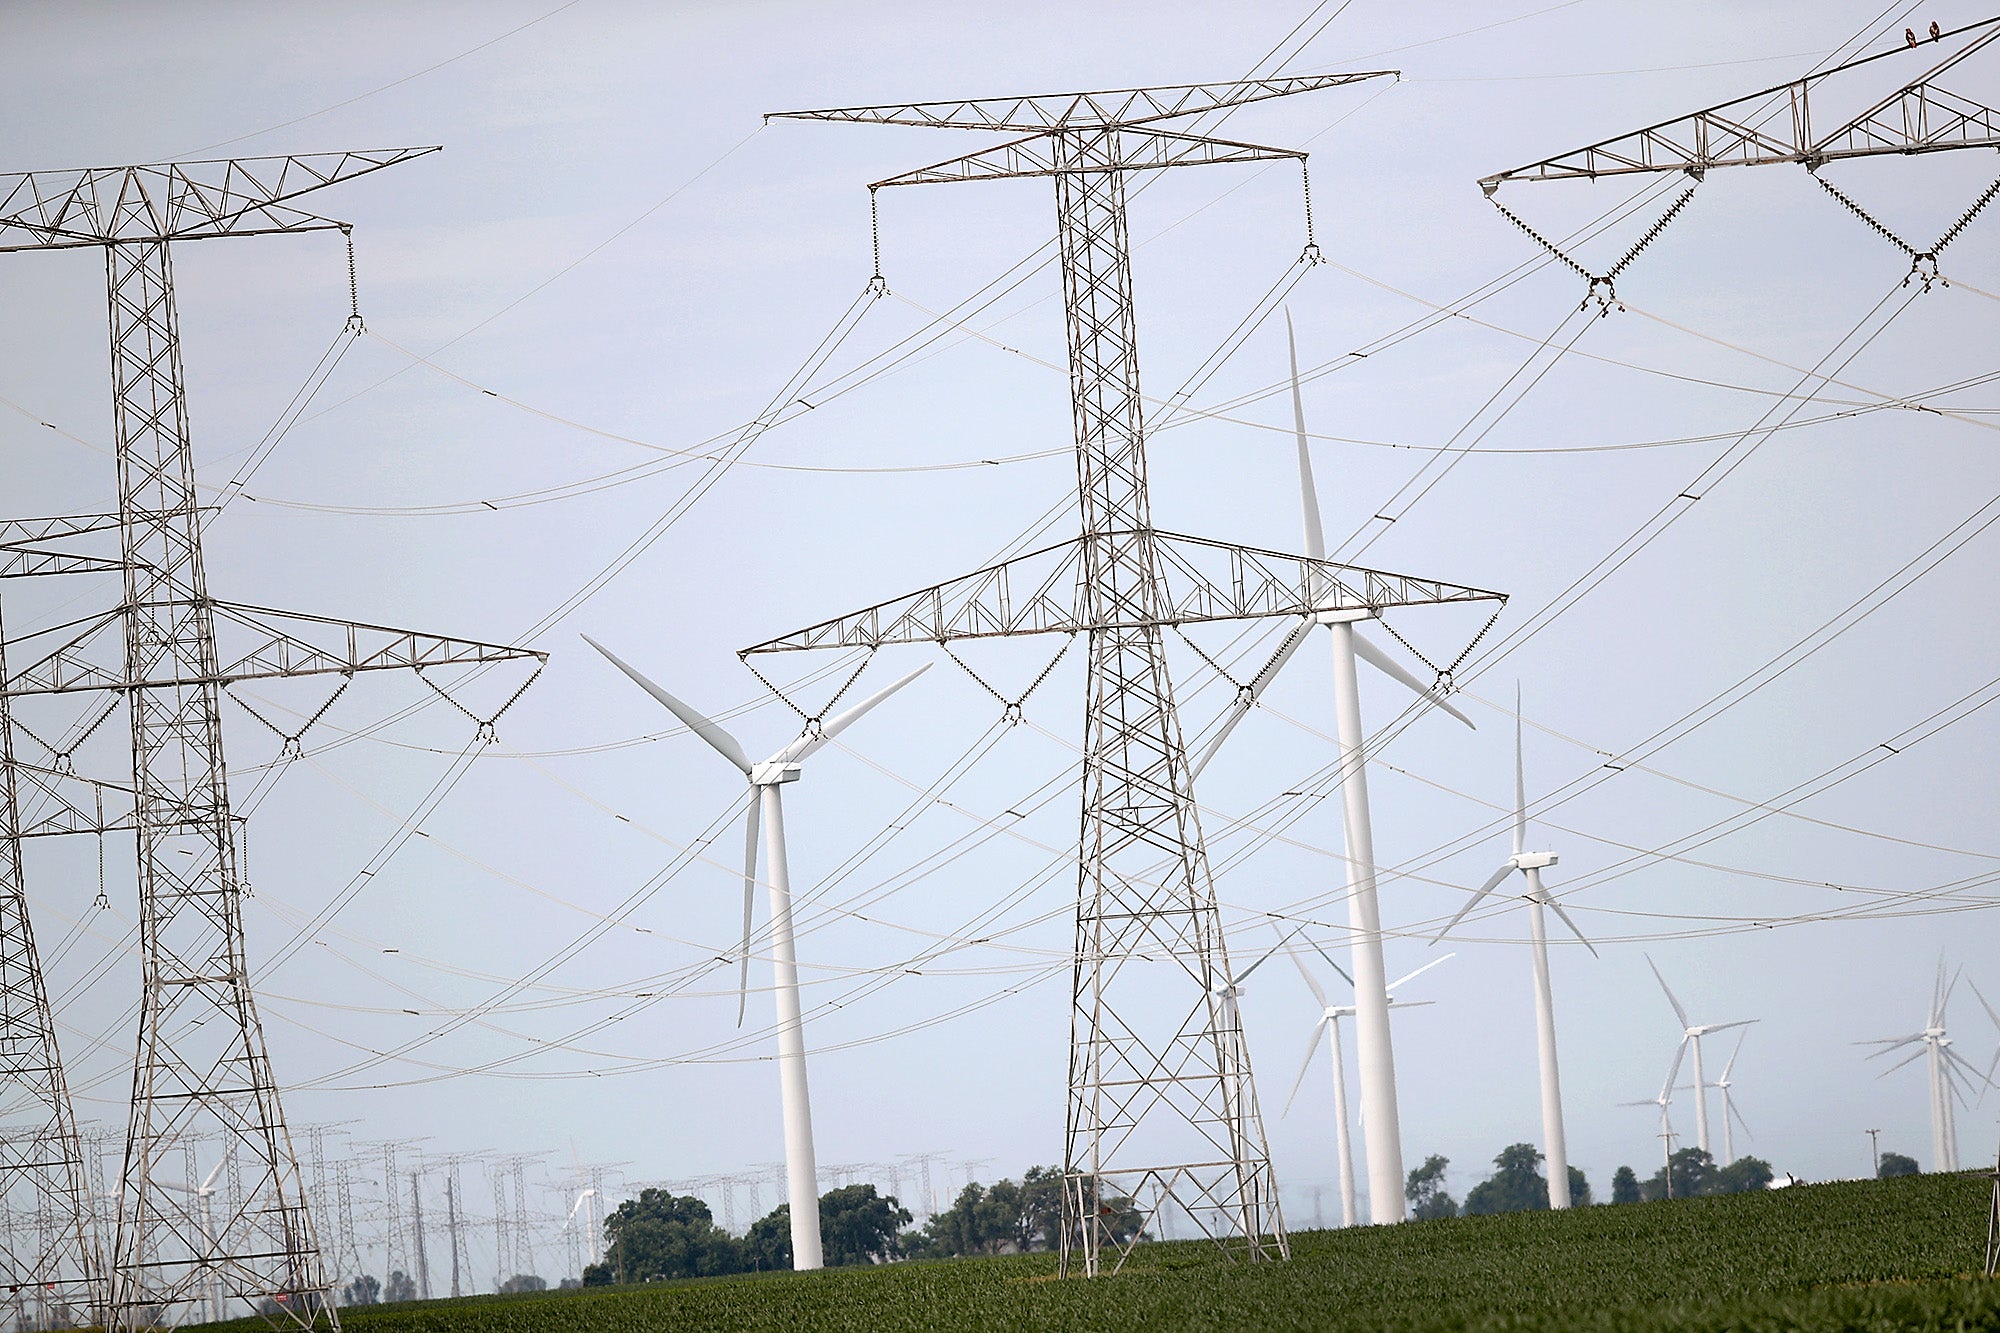 Power lines and power generating windmills rise above the rural landscape on June 14, 2018 near Dwight, Illinois. Driven by falling costs, global spending on renewable energy sources like wind and solar is now outpacing investment in electricity from fossil fuels and nuclear power.  (Scott Olson / Getty Images)